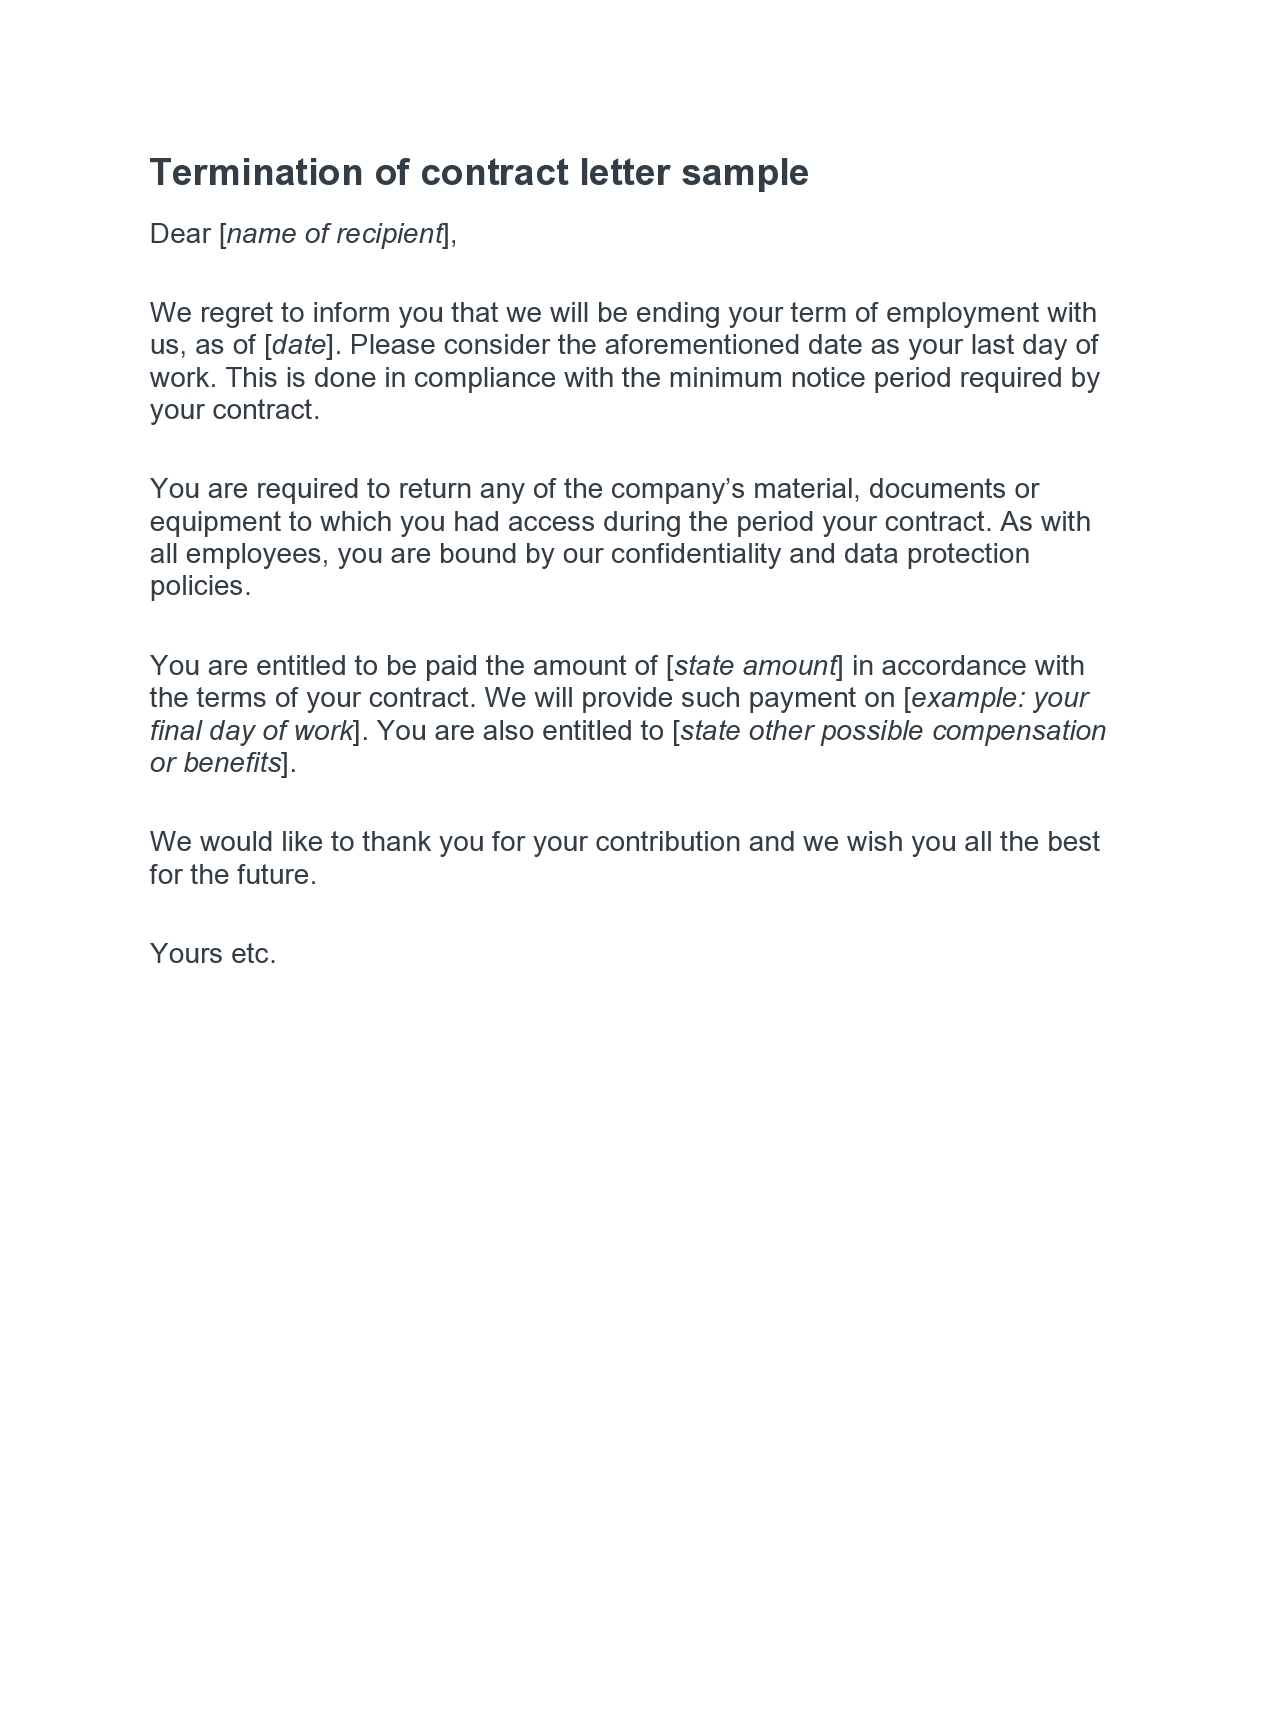 Free contract termination letter 34